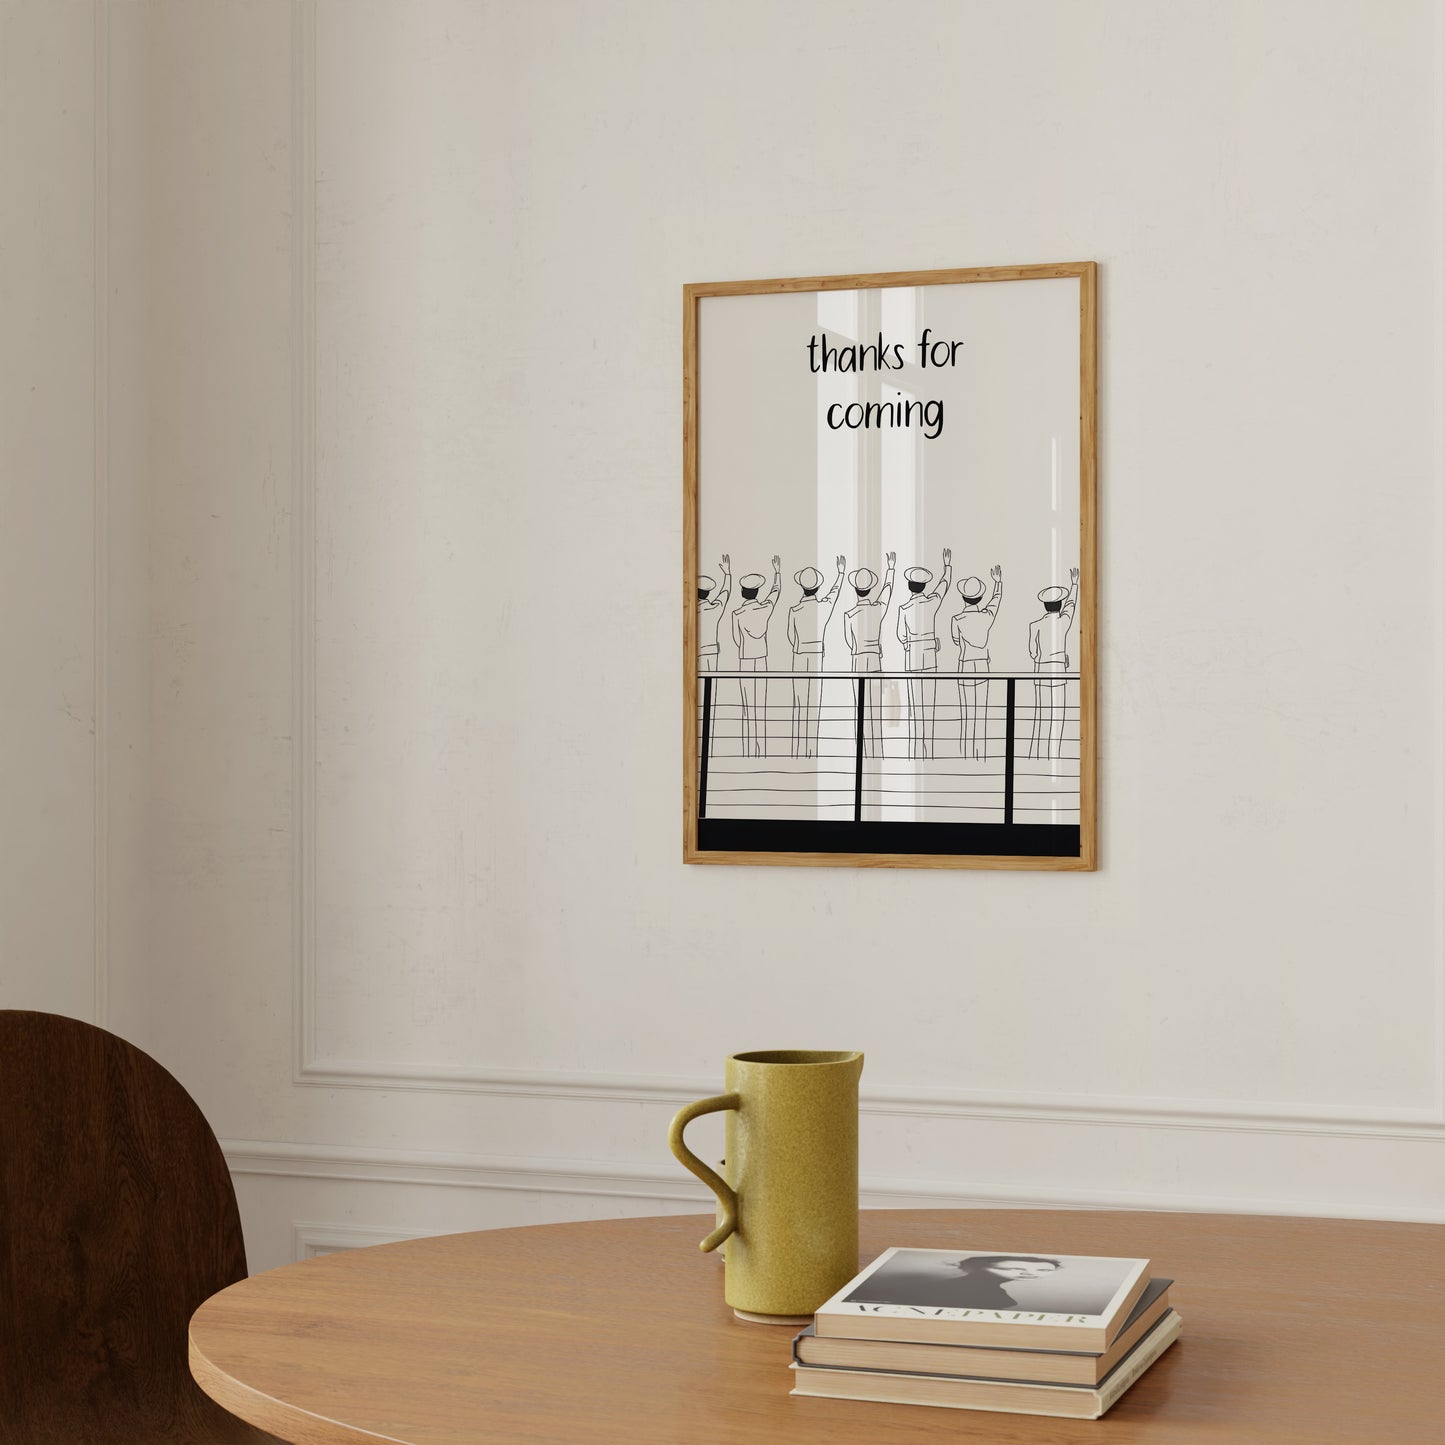 A framed illustration on a wall with the text "thanks for coming" above playful line drawings.